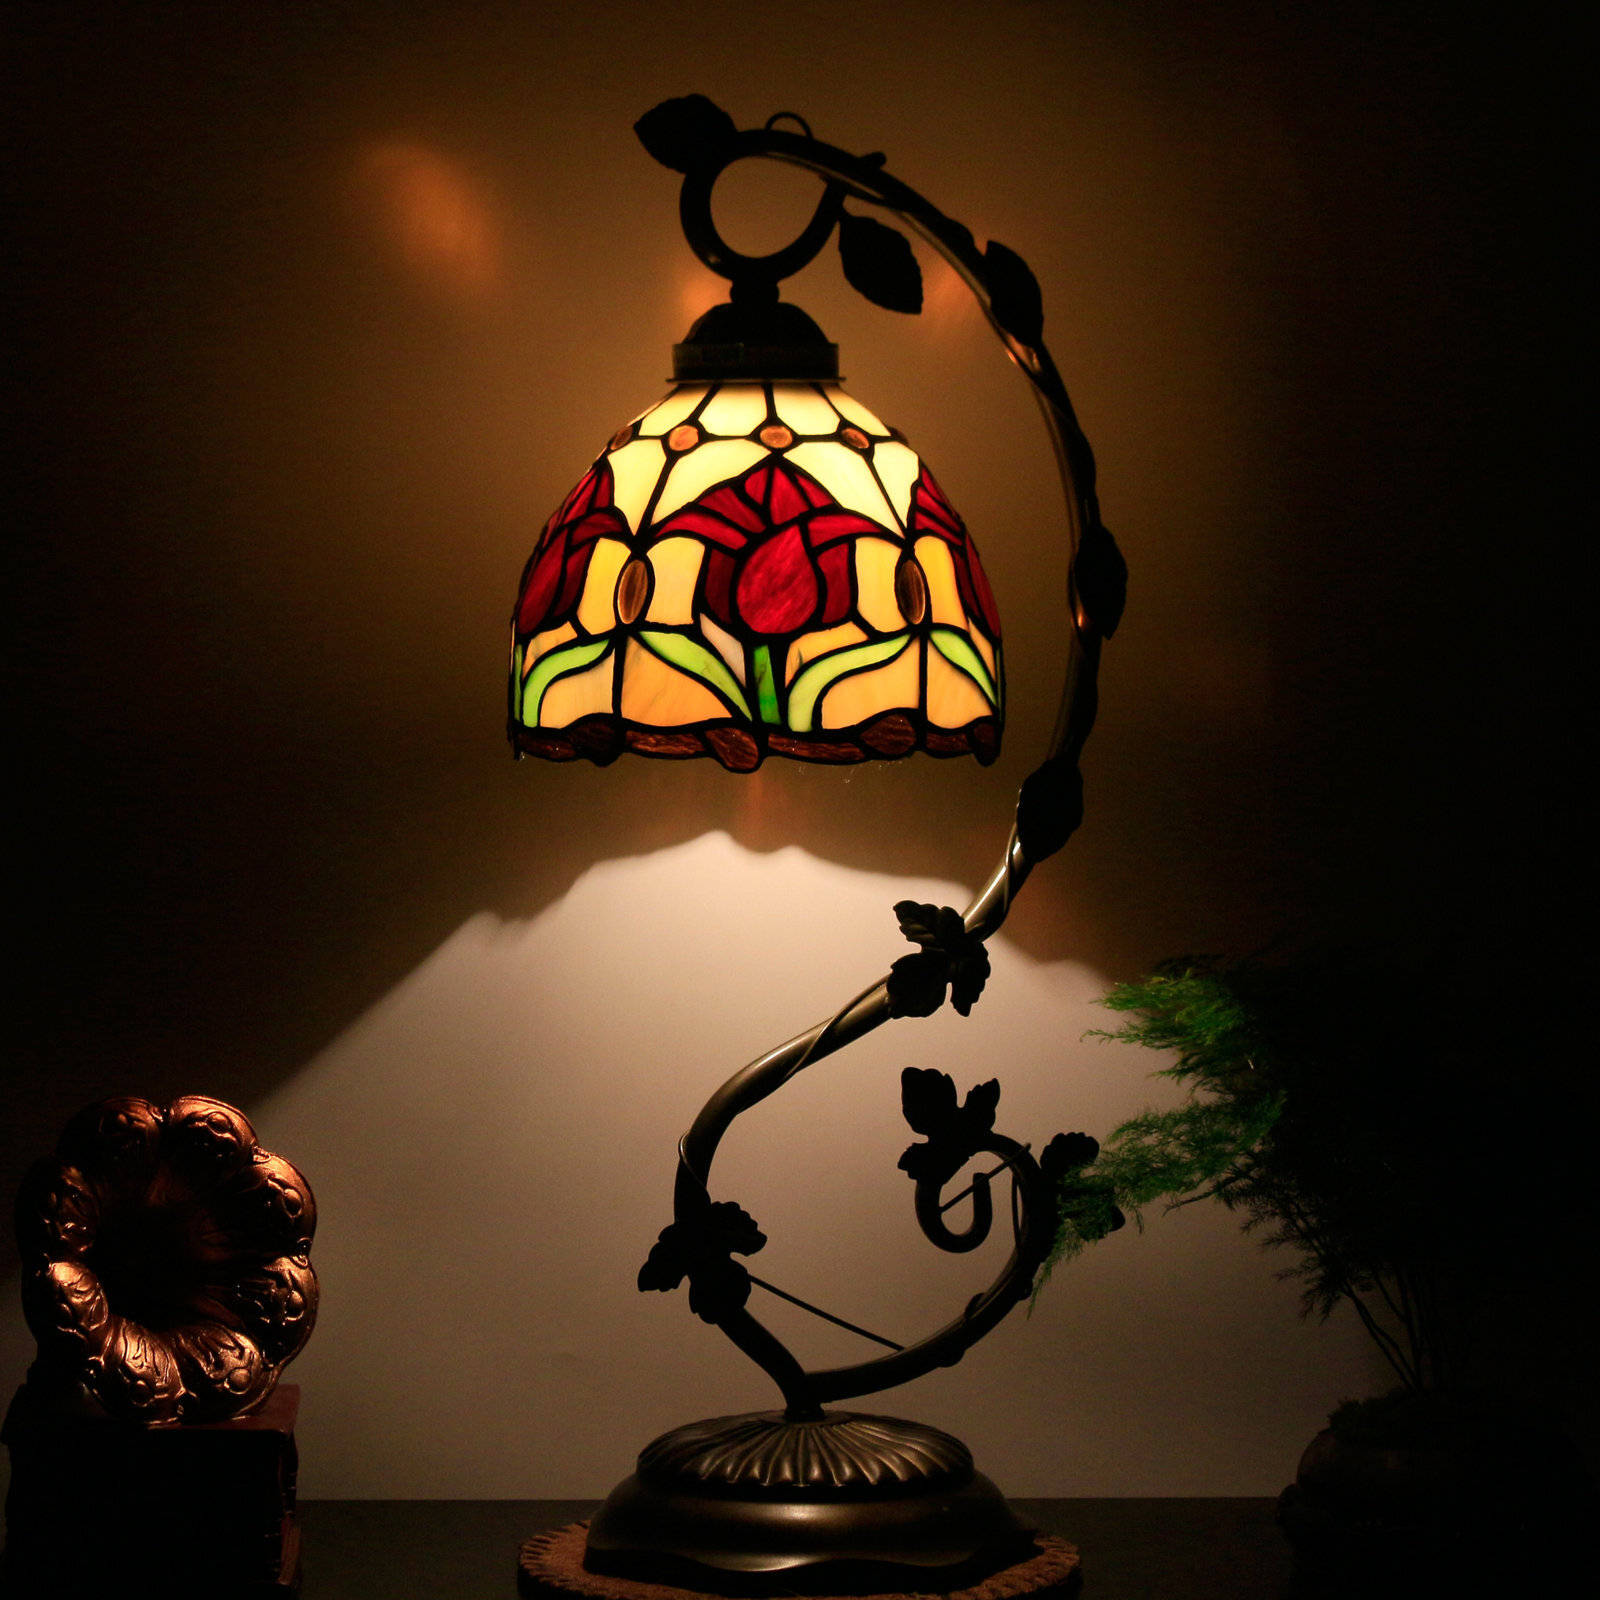 Tiffany Lamp Tulip Flower Stained Glass Style Table Reading Light W8H20 Inch (LED Bulb Included) S030 World Menagerie LAMPS Parent Lover Kid Friend Living Room Bedroom Coffee Bar Desk Bedside Antique Gifts